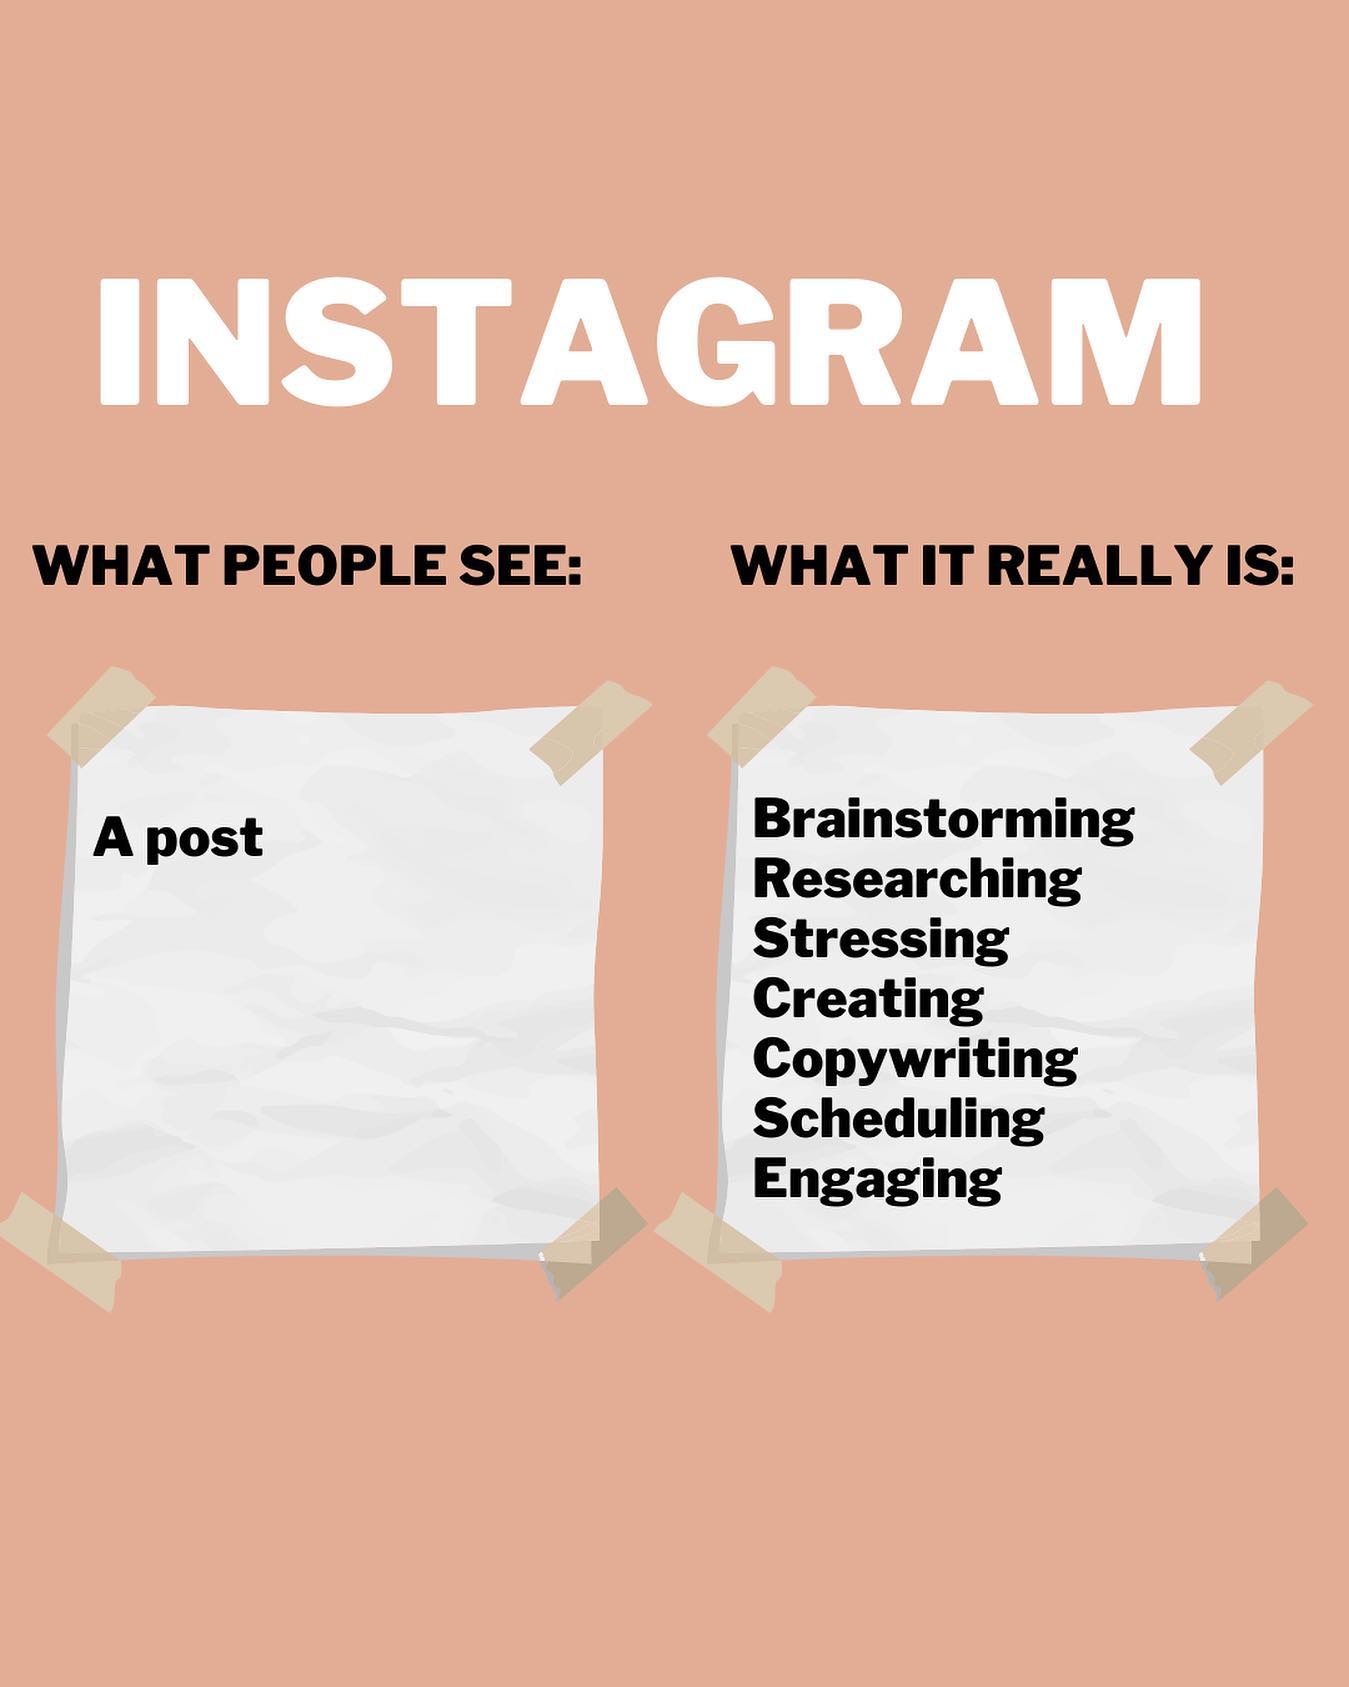 “Pfft…what are you stressing about?
Instagram is easy”

….said nobody, EVER! 

Who agrees?
.
.
.
#igtipsandtricks #instagramforbusiness #instagramideas #instagramcoach #socialmediamelbourne #socialmediaideas #socialmediatips #instagramforbusinesses #contentstrategytips #contentideas #instagramtipsforbusiness